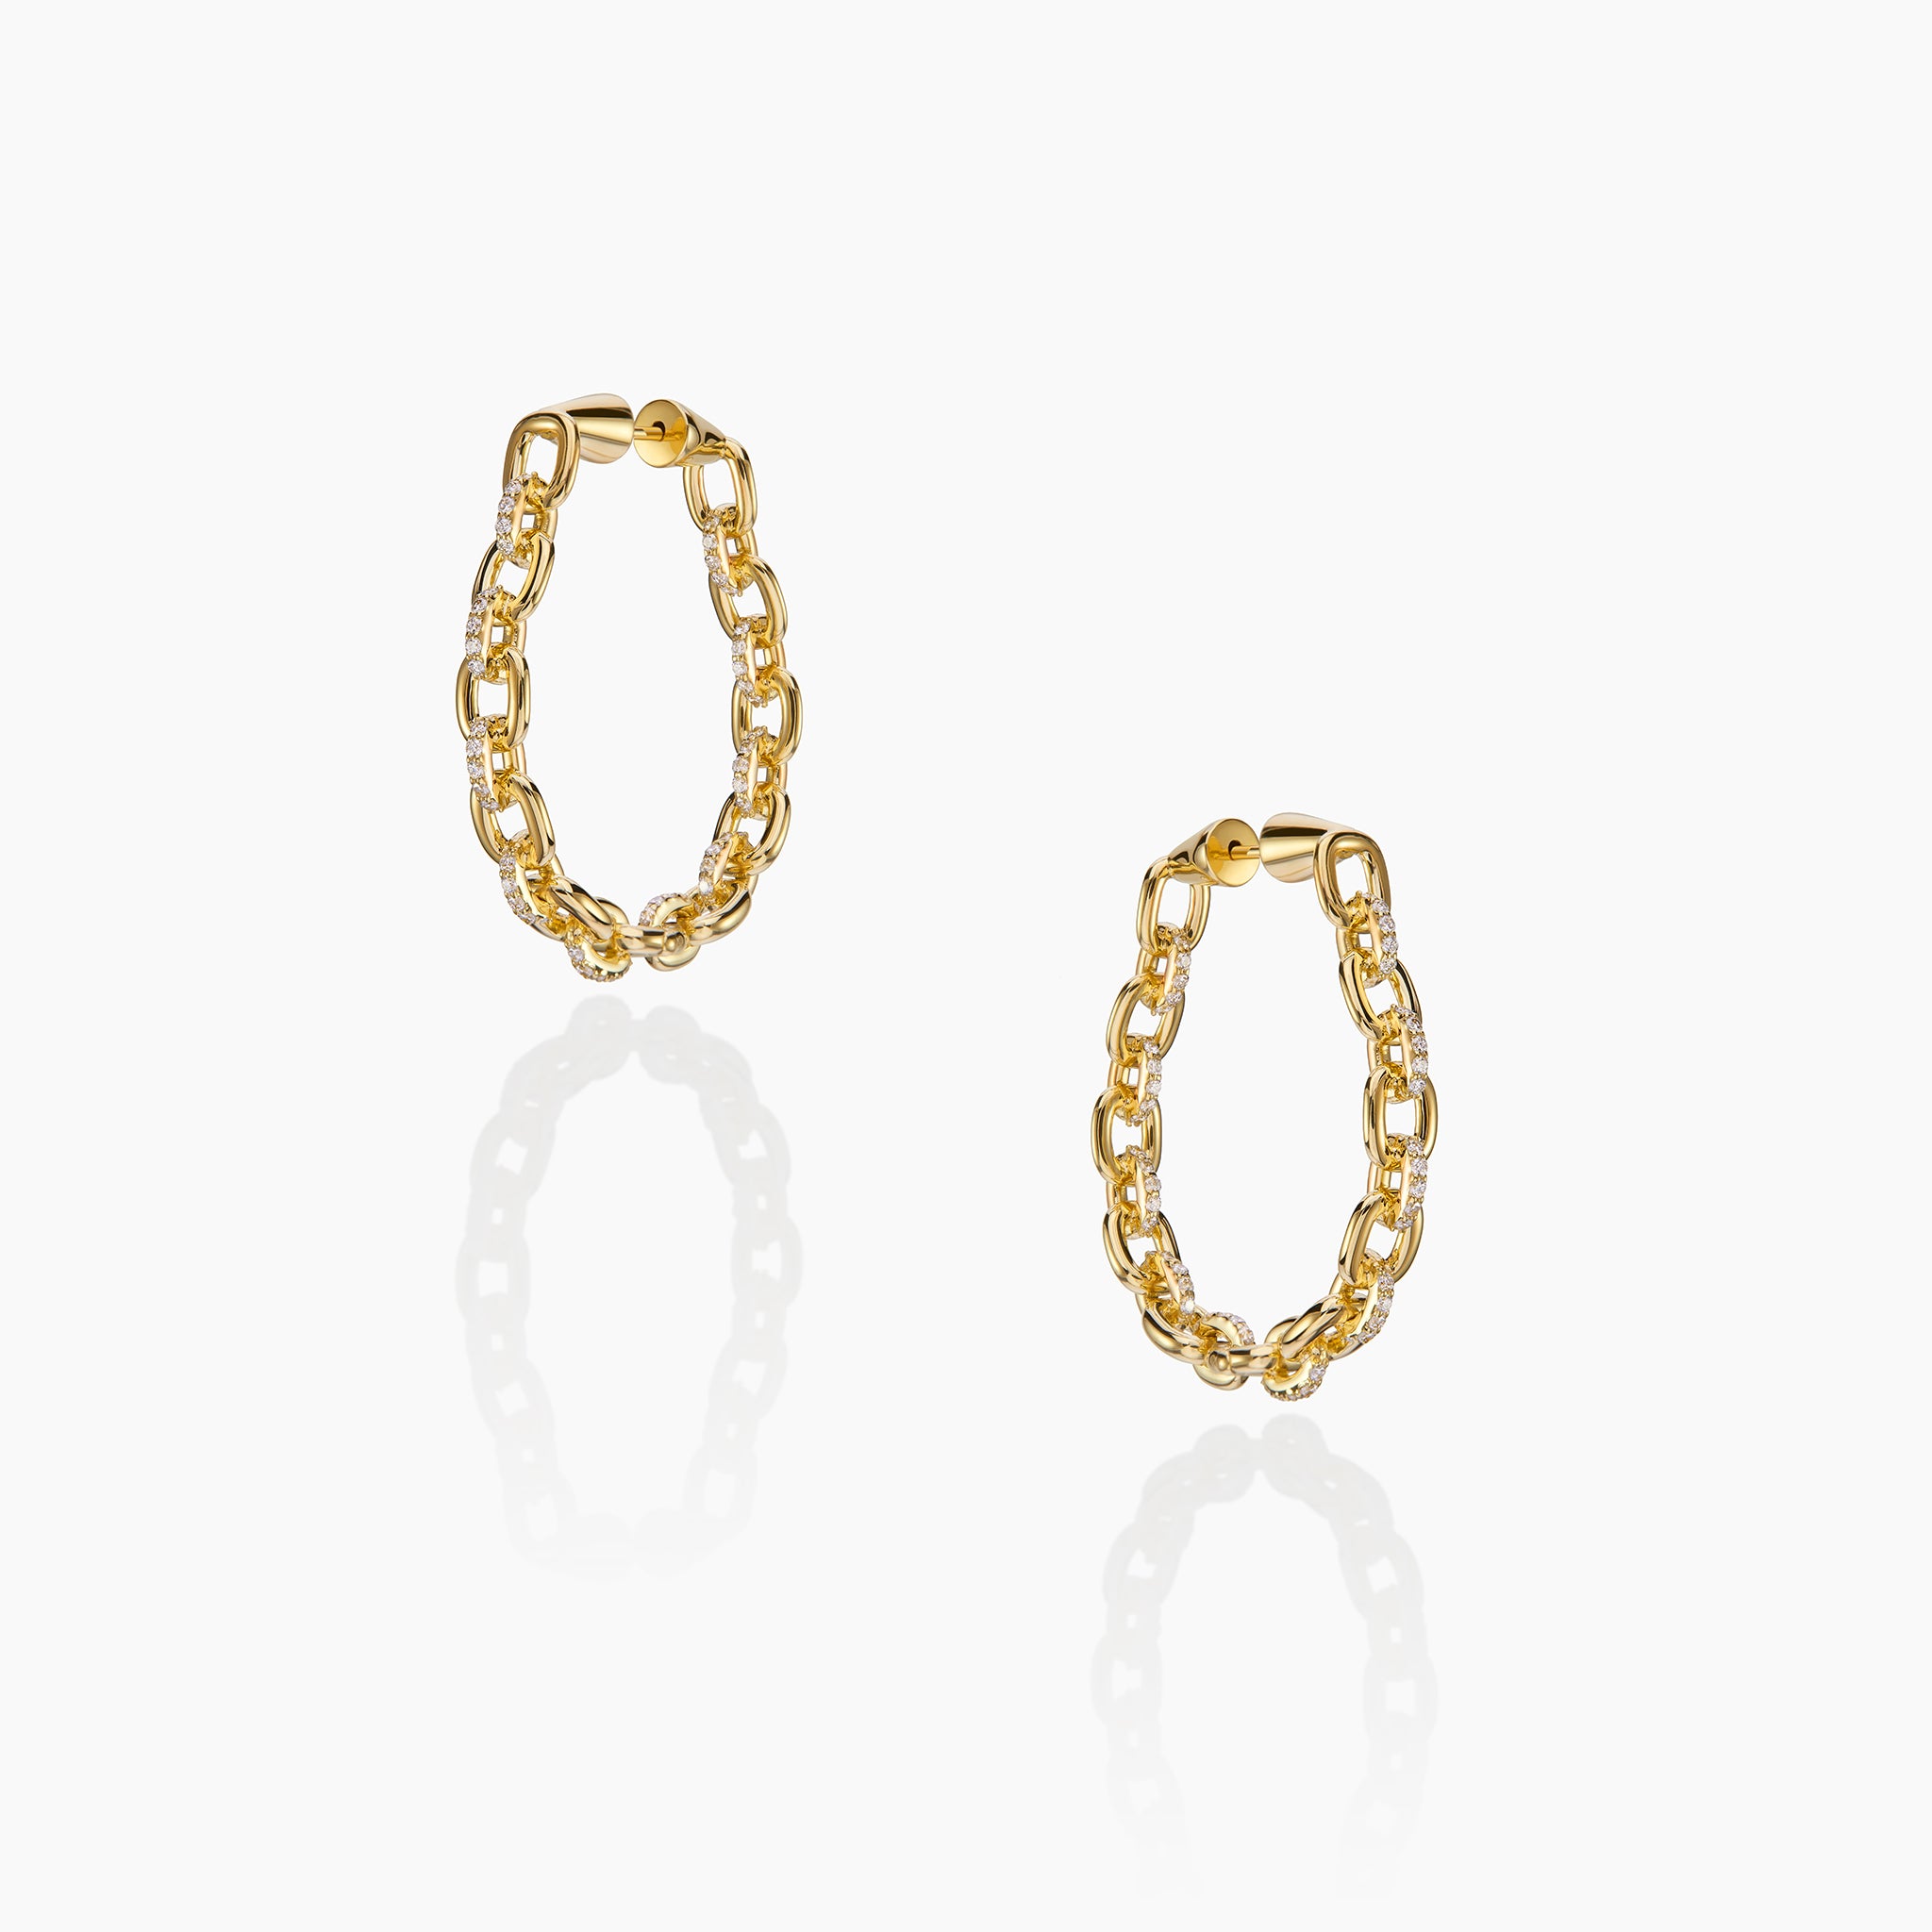 Horsebit Diamond link Hoop Earrings in yellow gold displayed on an off white background.